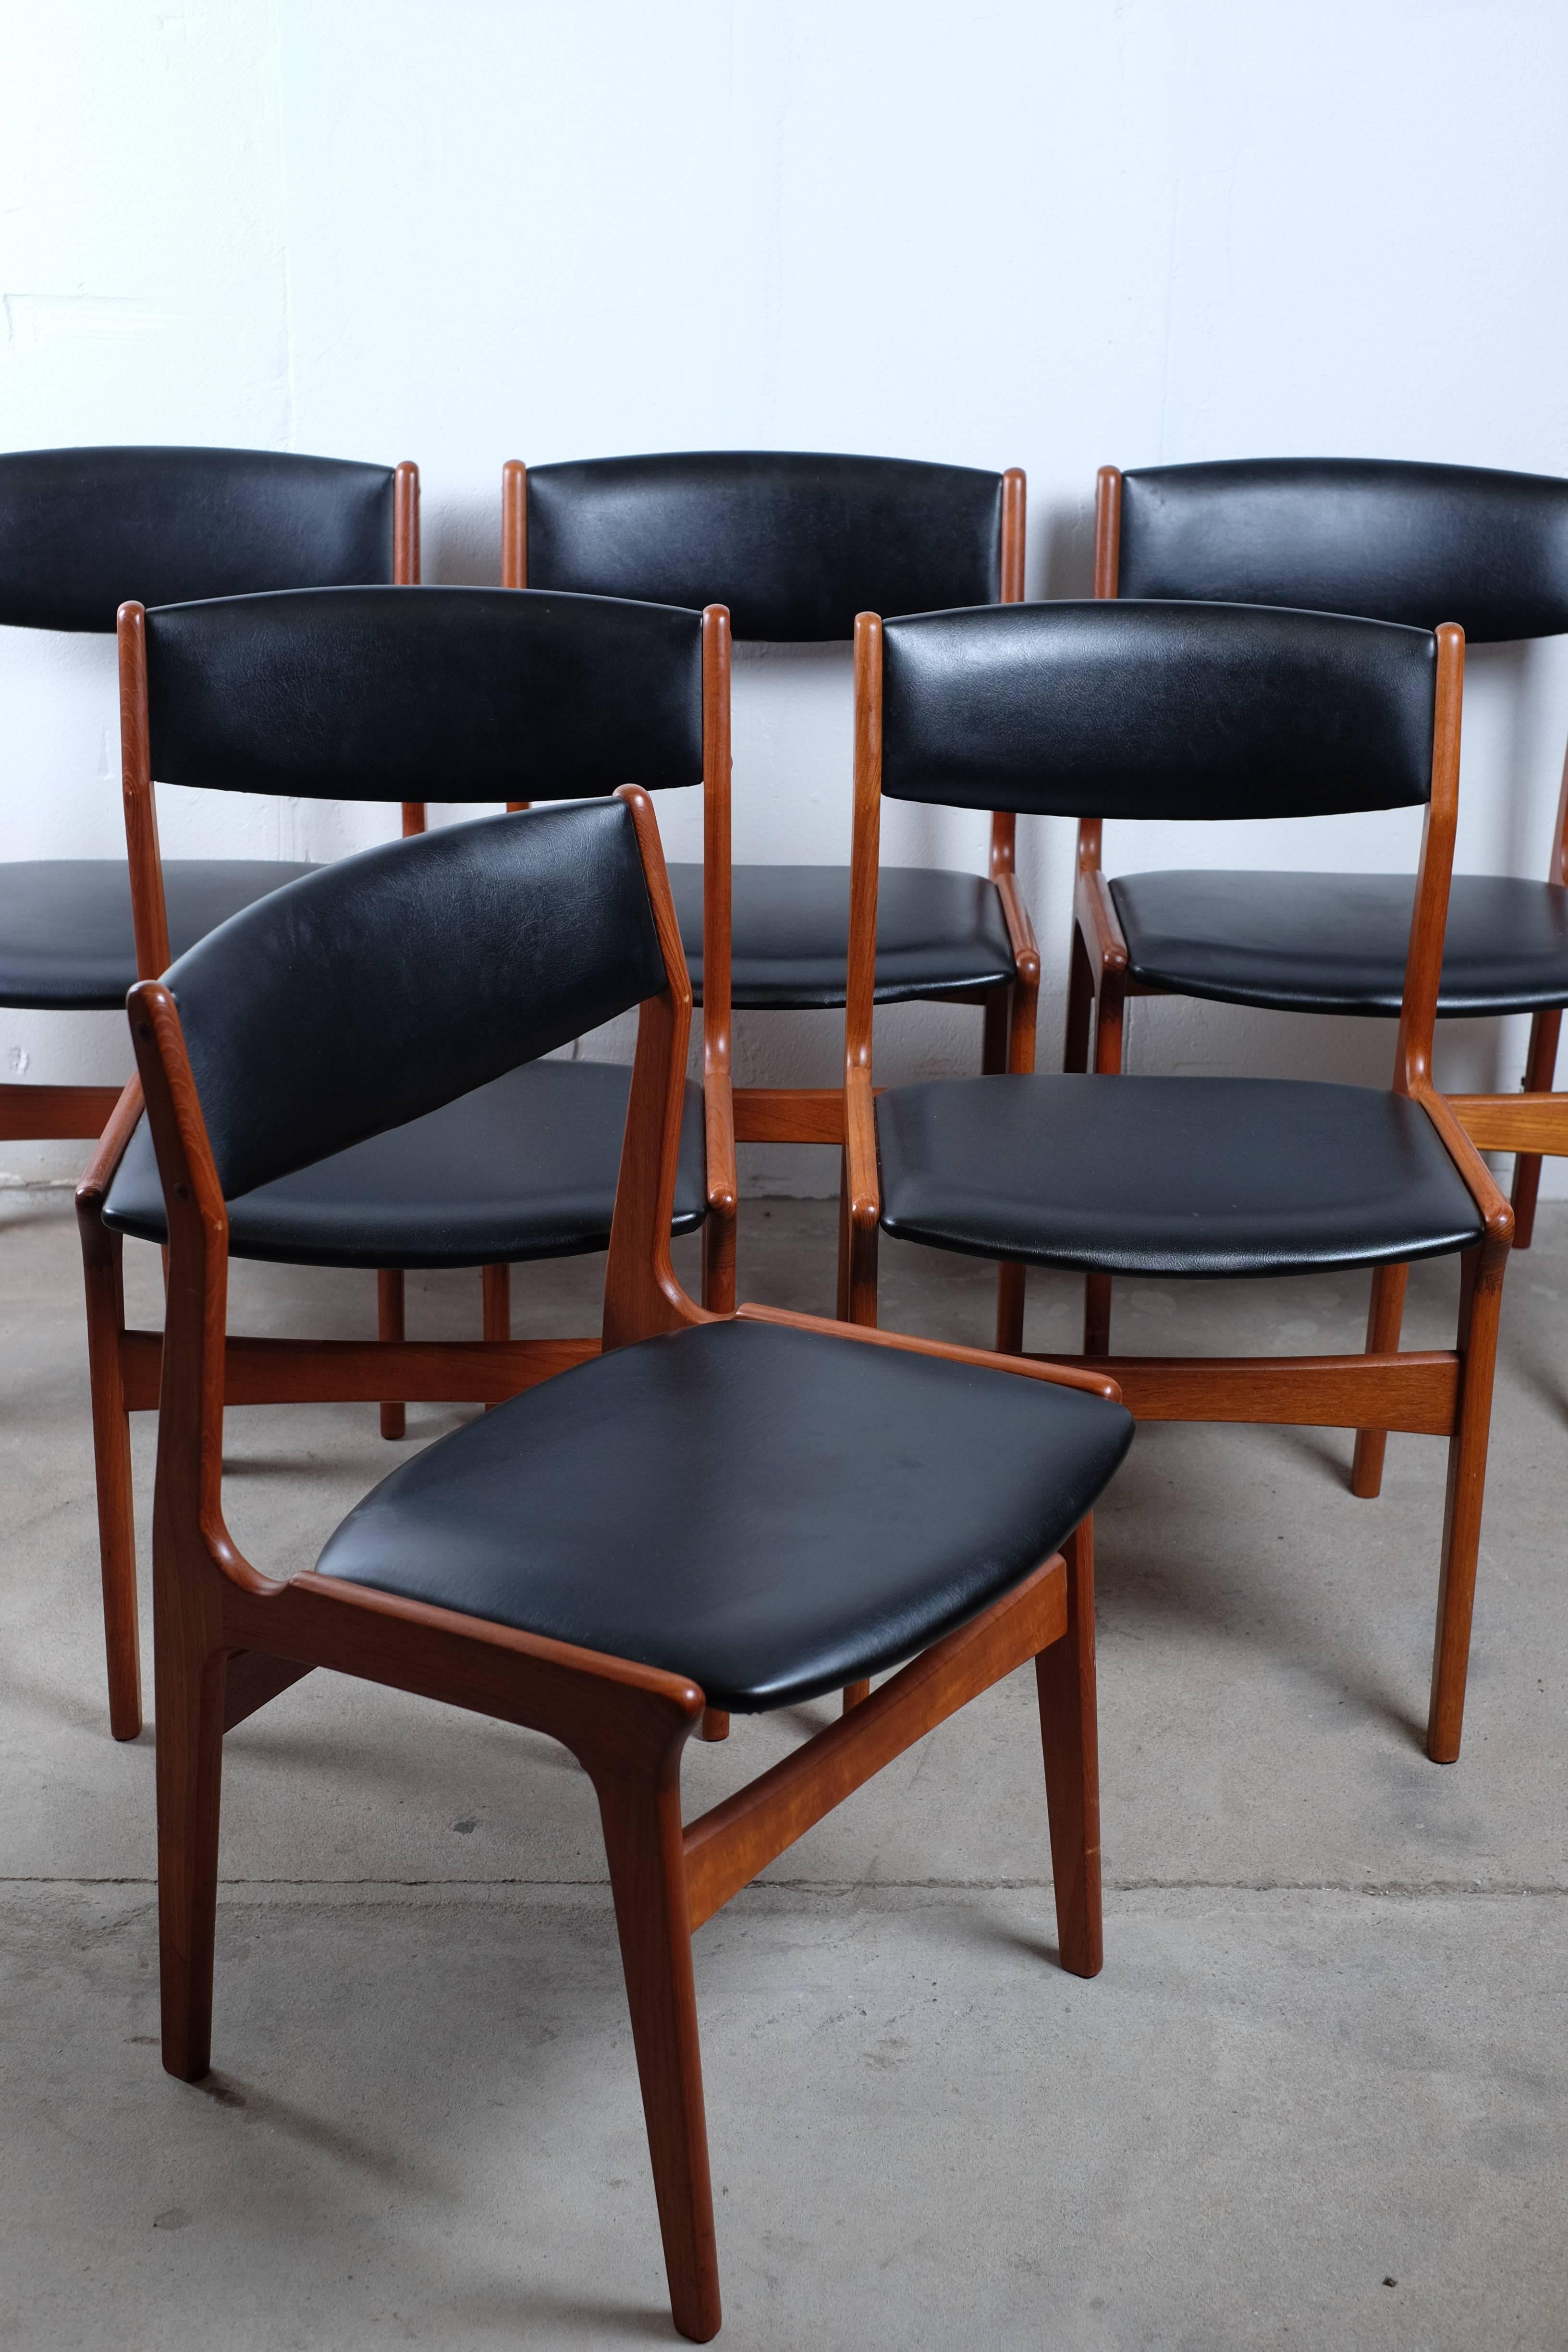 This very beautiful set of six minimalistic dining chairs was made in the 1960s by Nova. 

The chairs are in very good condition and has black artificial leather which also are in good condition, with few signs of age related wear. 

They